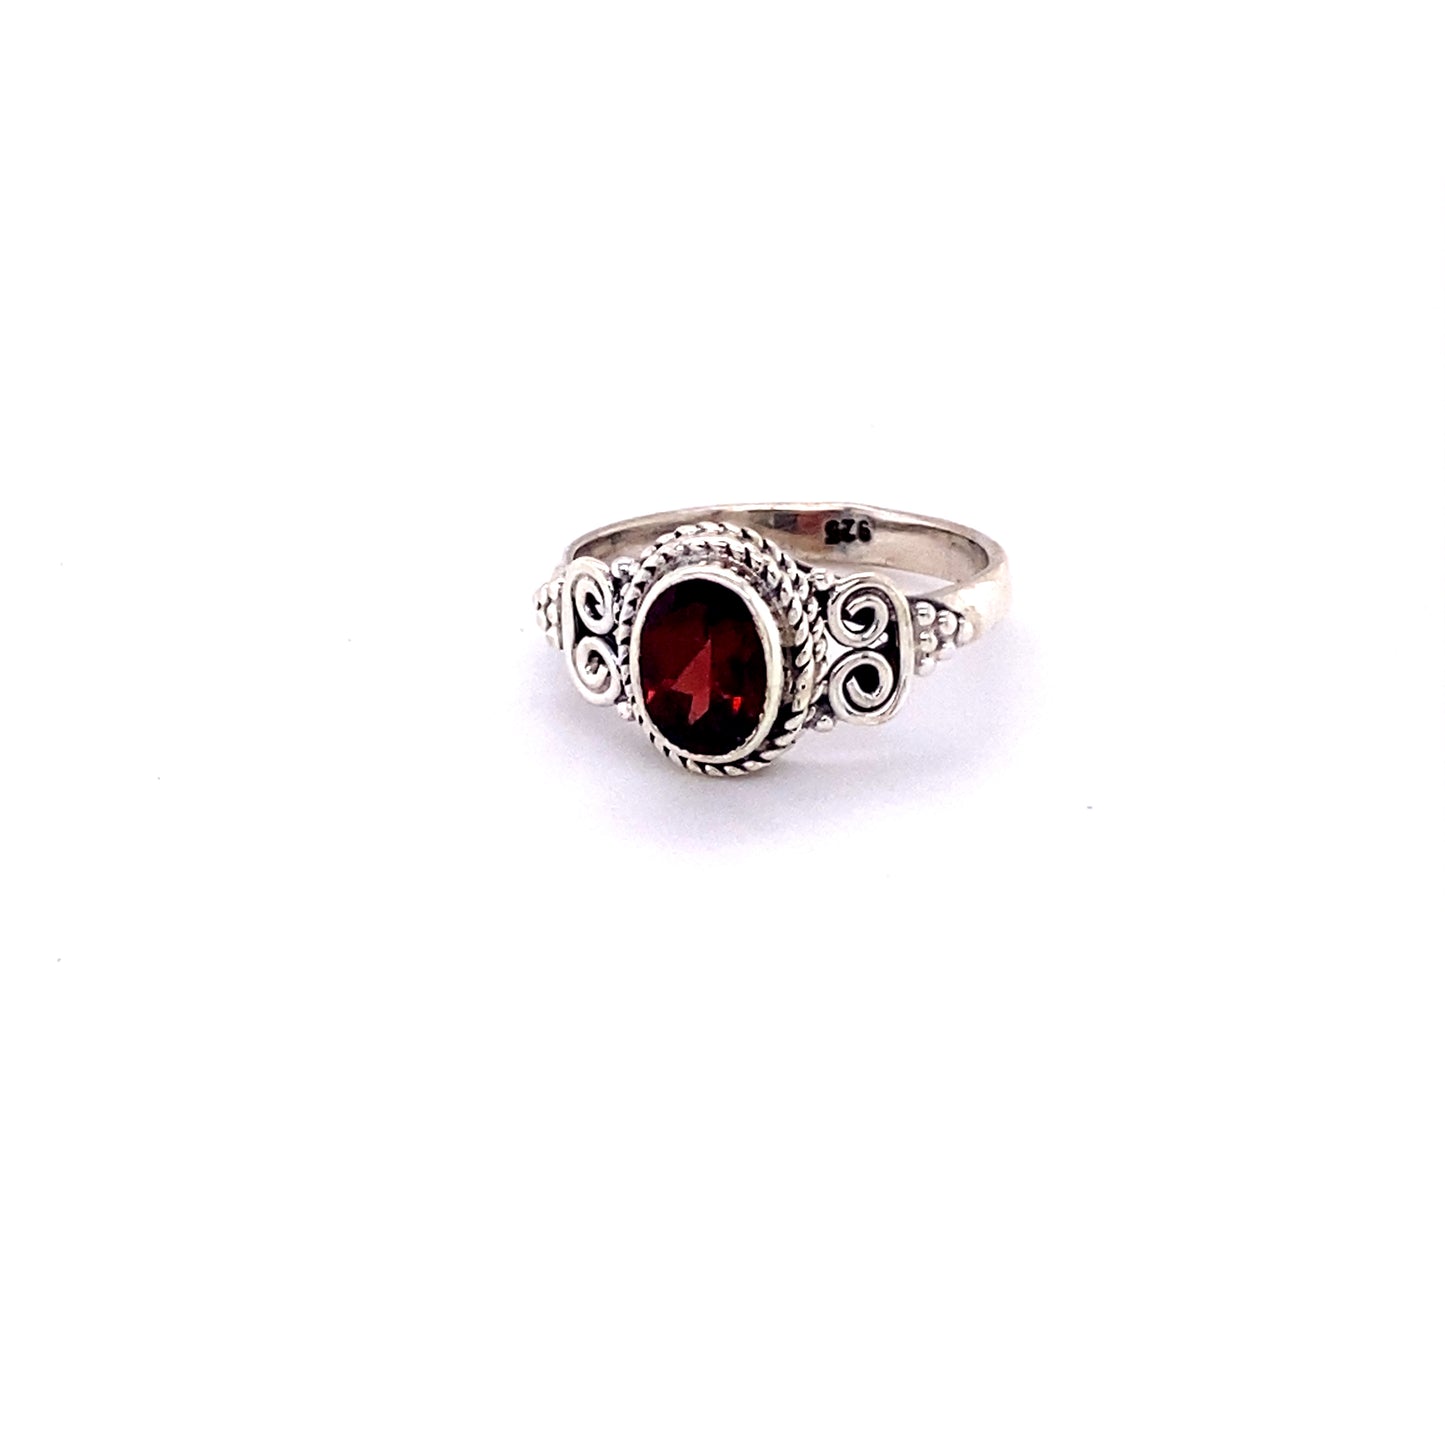 
                  
                    A hippie-inspired Oval Faceted Gemstone Ring with a Swirl Design featuring a stunning cabochon garnet stone.
                  
                